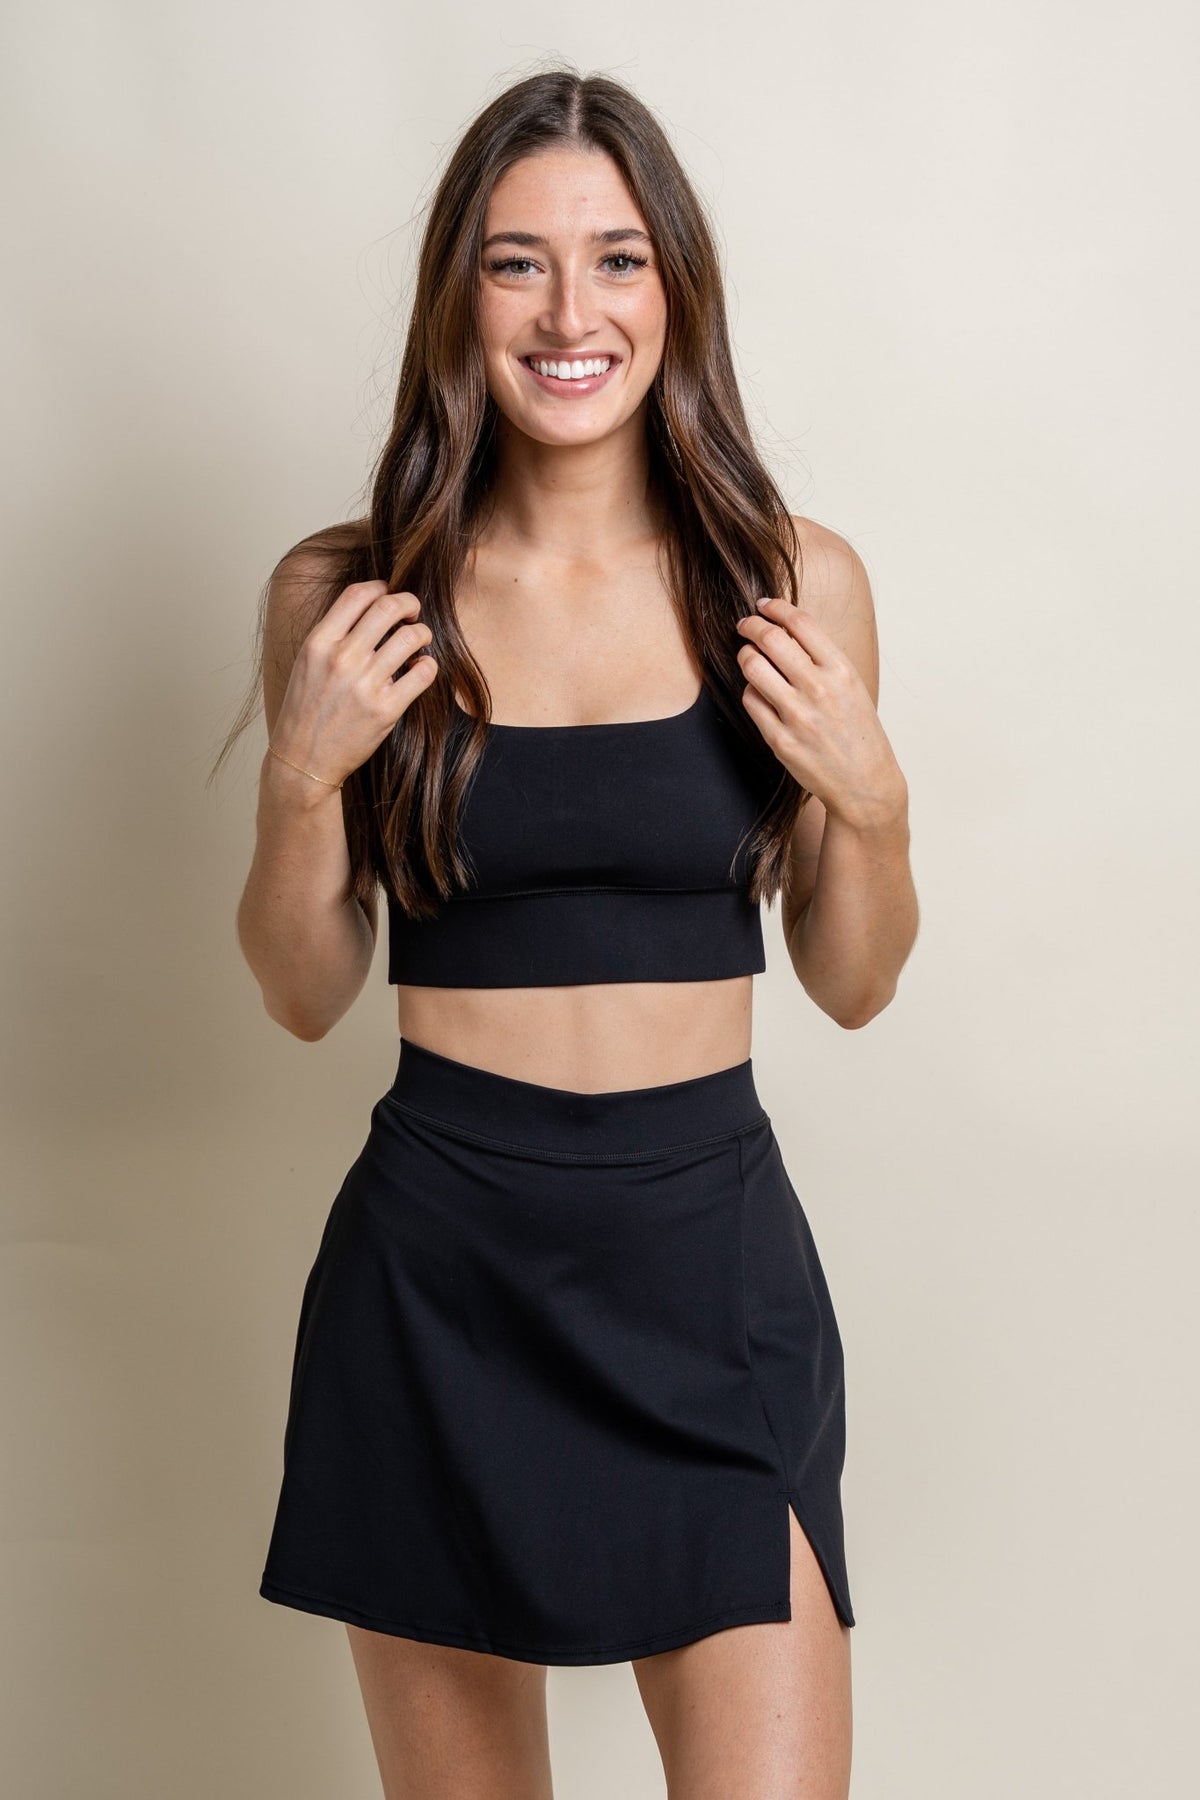 Z Supply elevate tank bra black - Z Supply sports bra - Z Supply Tops, Dresses, Tanks, Tees, Cardigans, Joggers and Loungewear at Lush Fashion Lounge